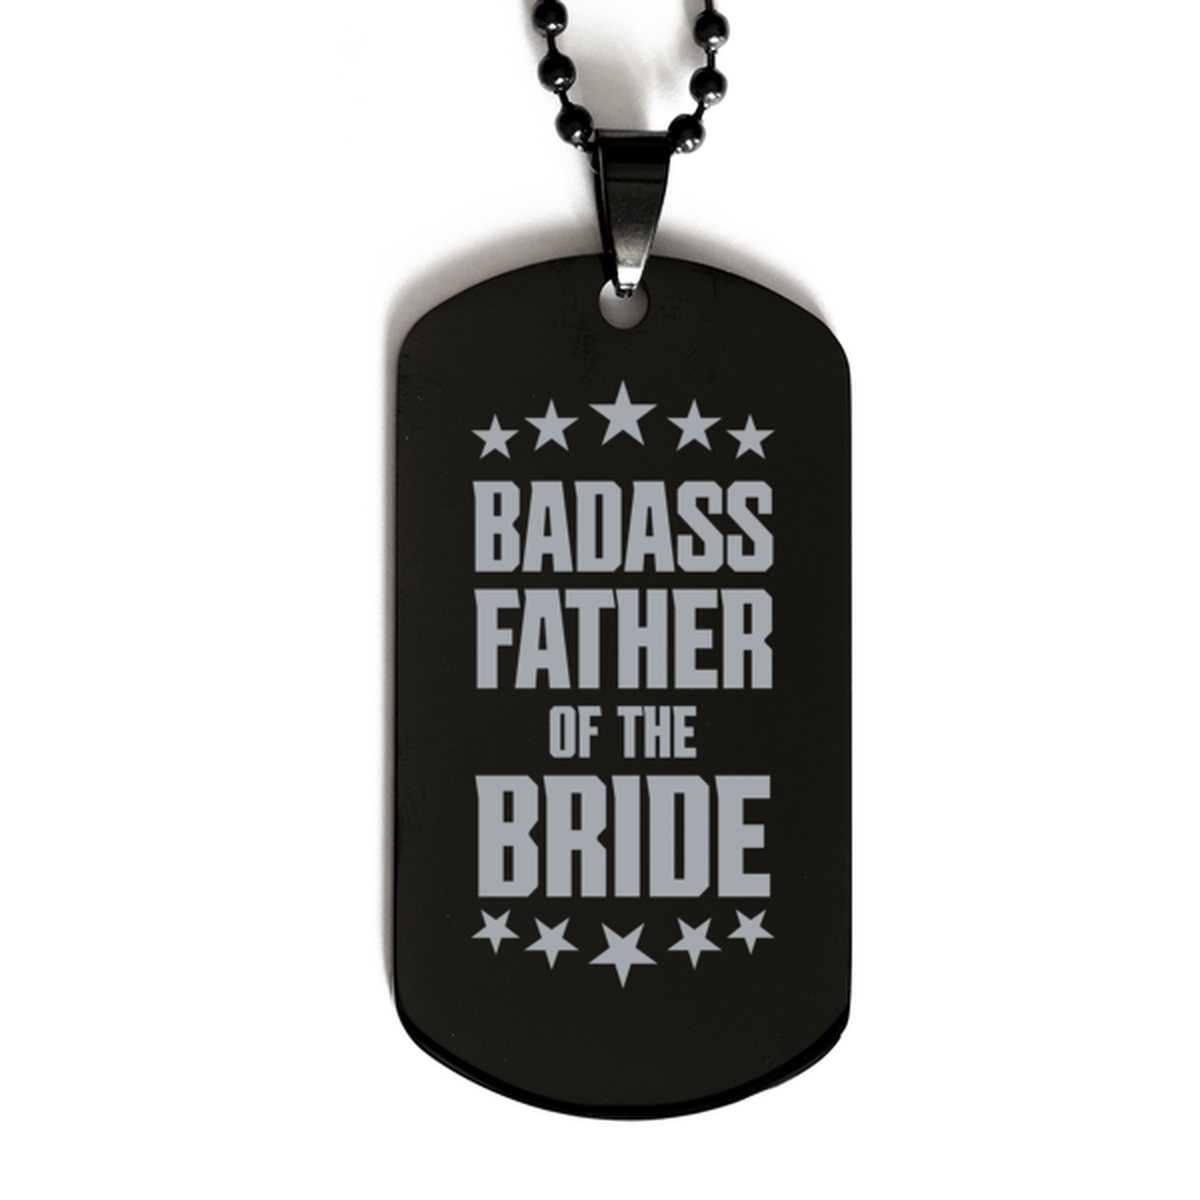 Father of the bride Black Dog Tag, Badass Father of the Bride, Funny Family Gifts  Necklace For Father of the bride From Son Daughter